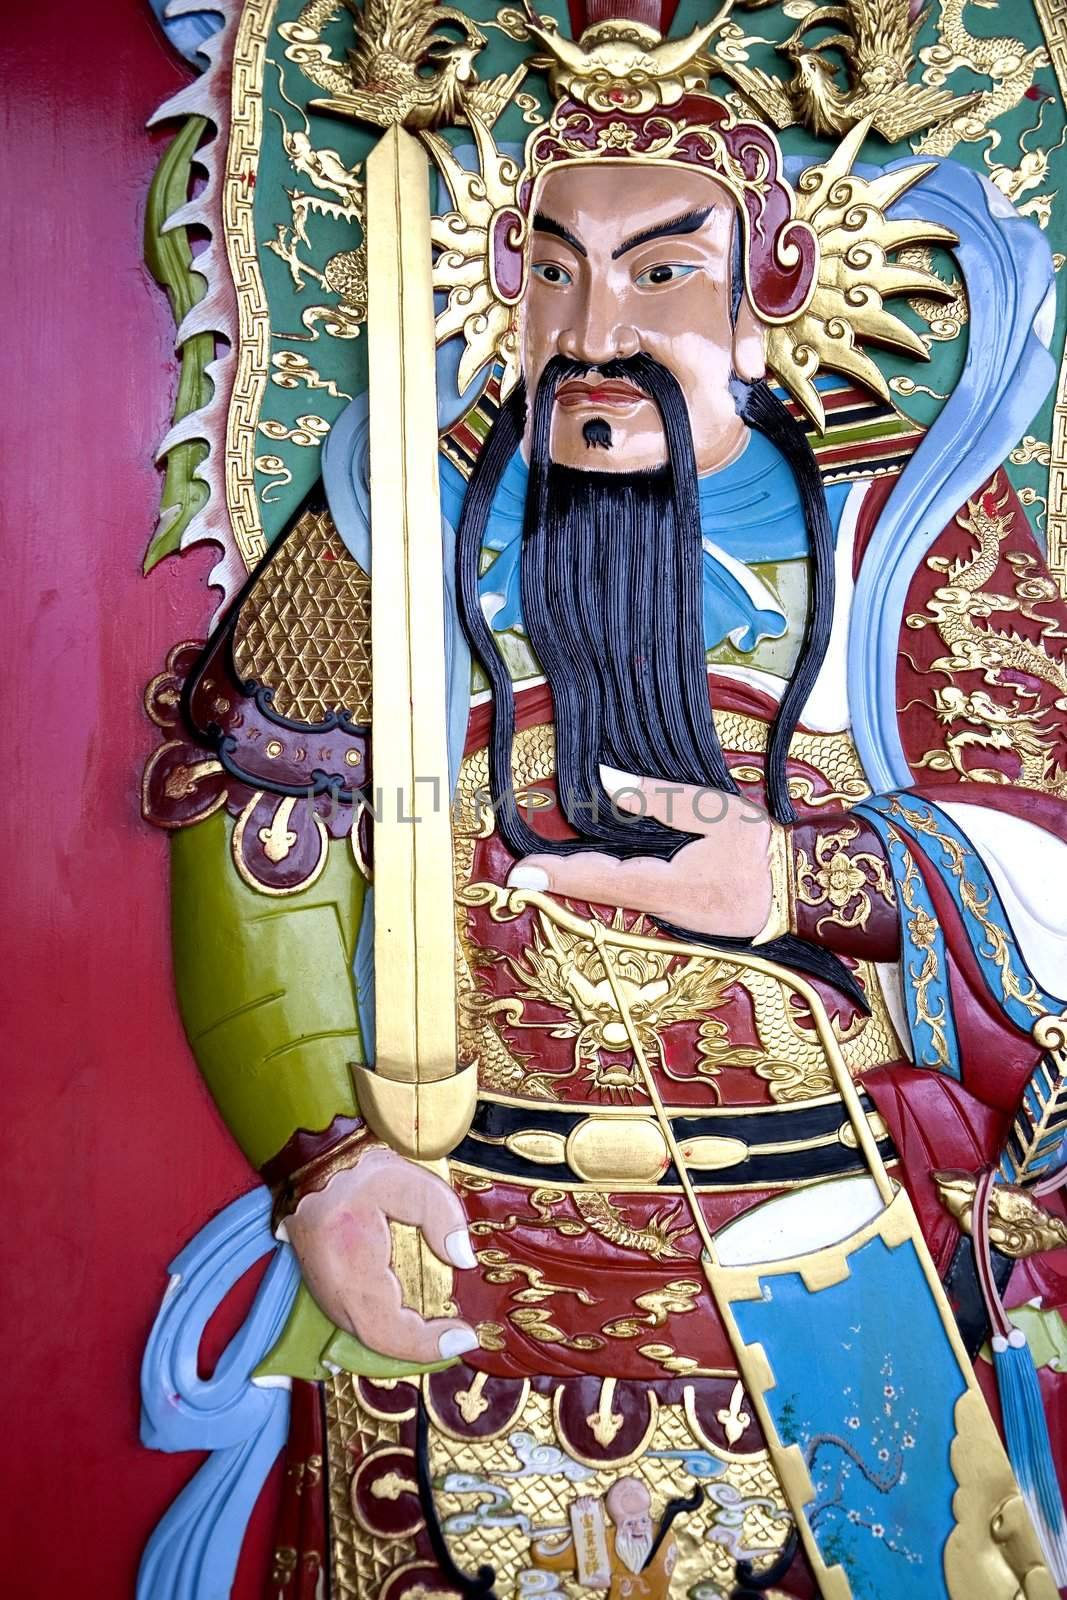 Image of a deity on a Chinese temple door.